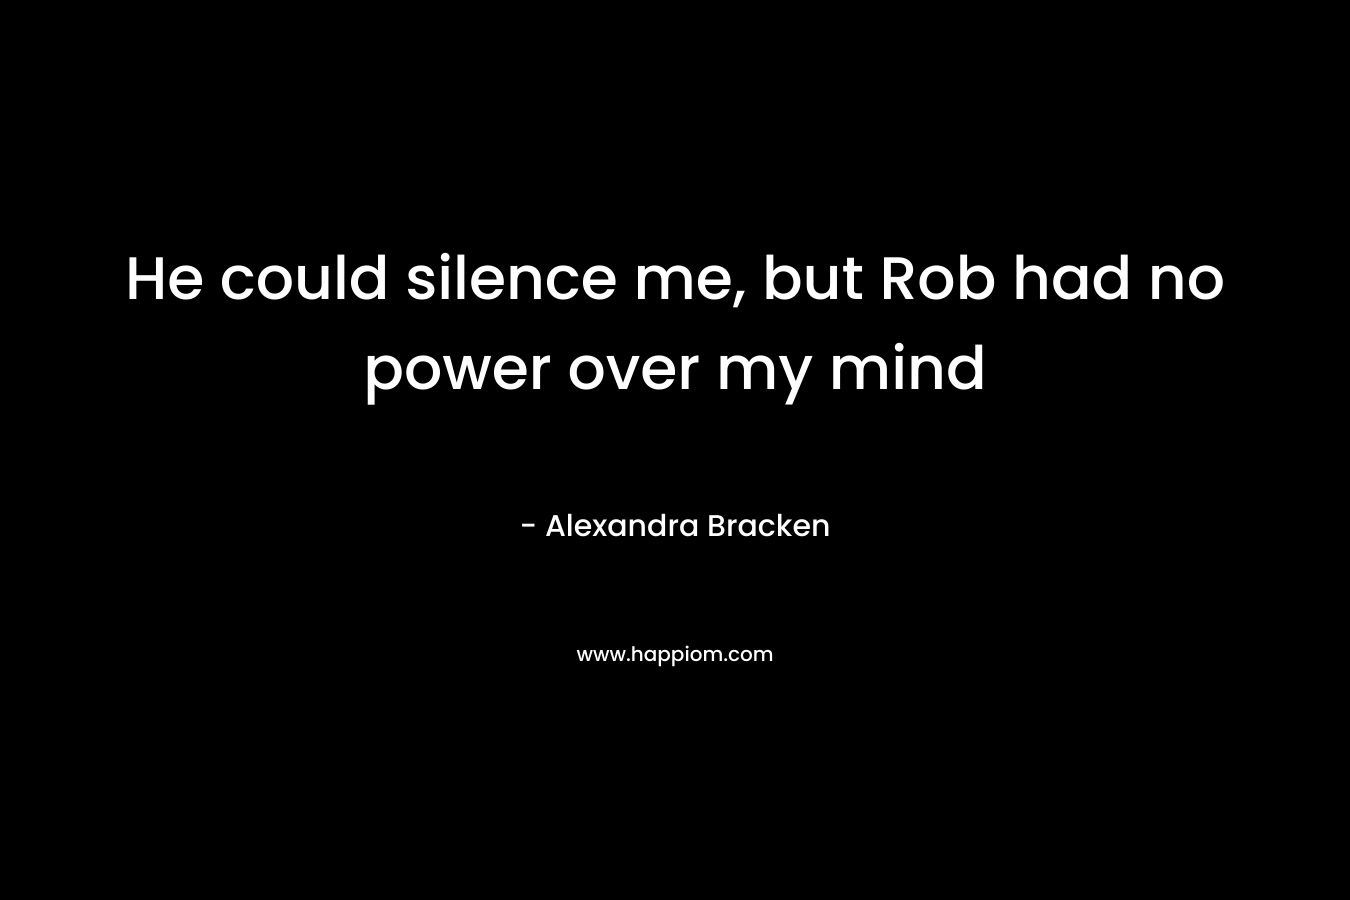 He could silence me, but Rob had no power over my mind